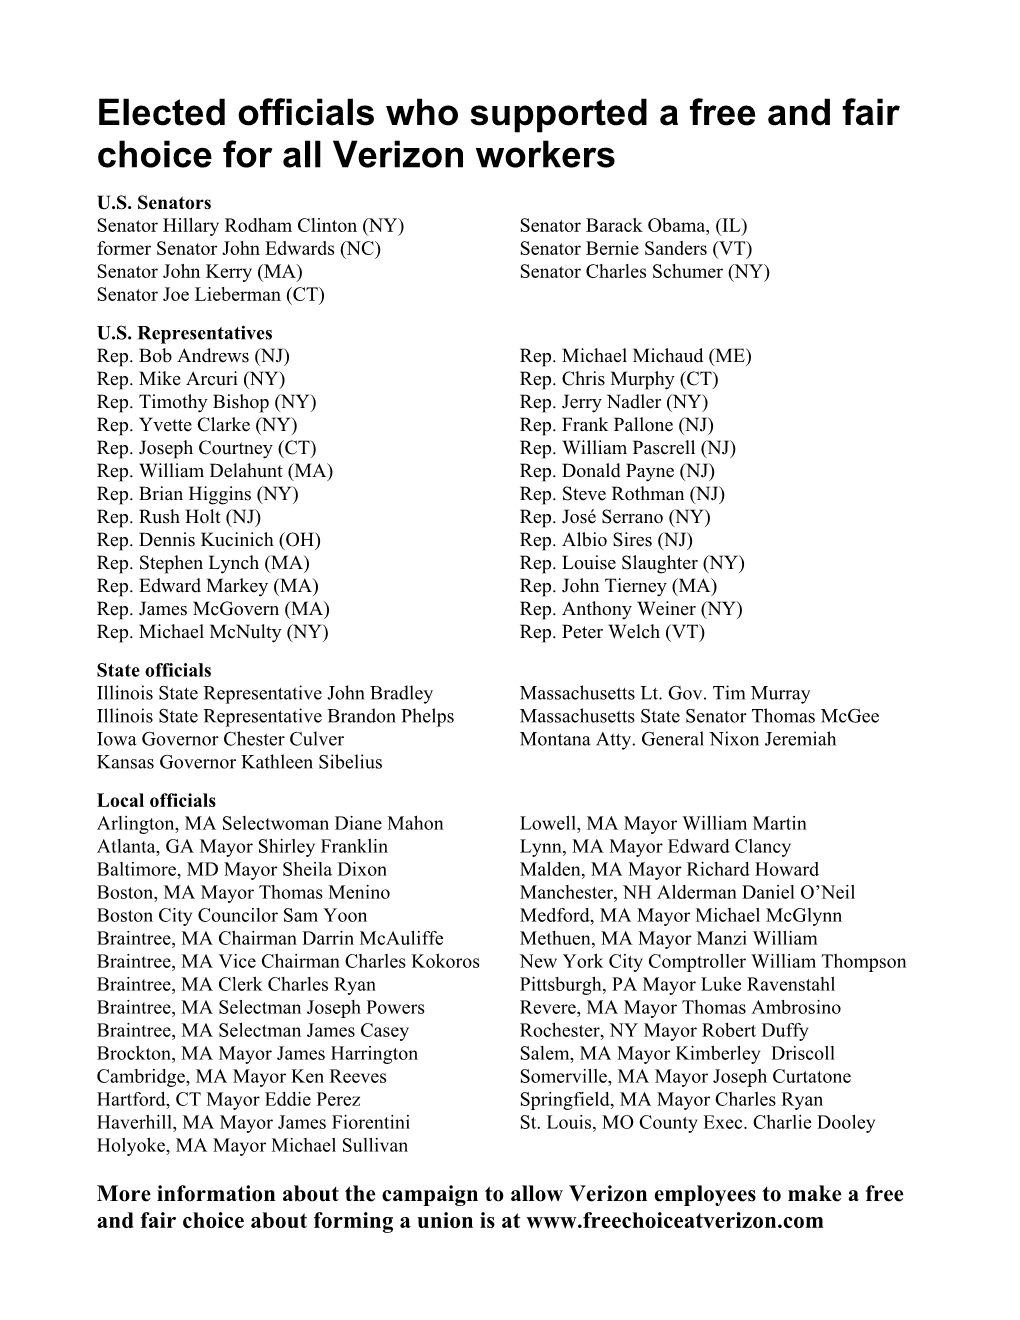 Elected Officials Who Supported a Free and Fair Choice for All Verizon Workers